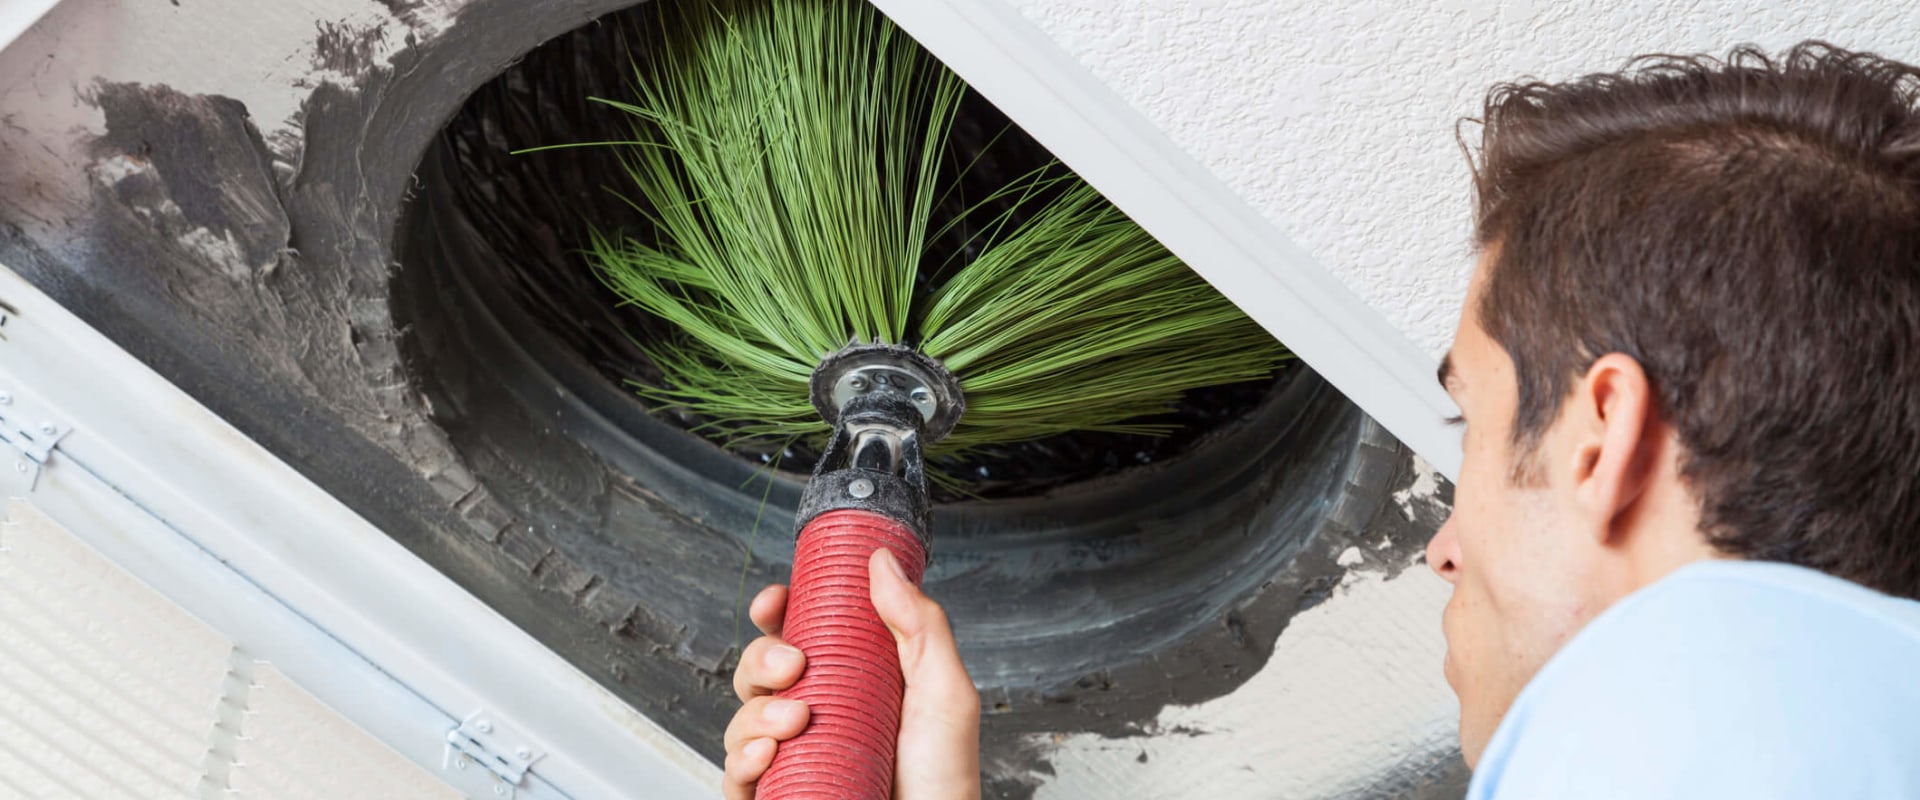 Becoming a Vent Cleaning Technician: What Training is Needed?